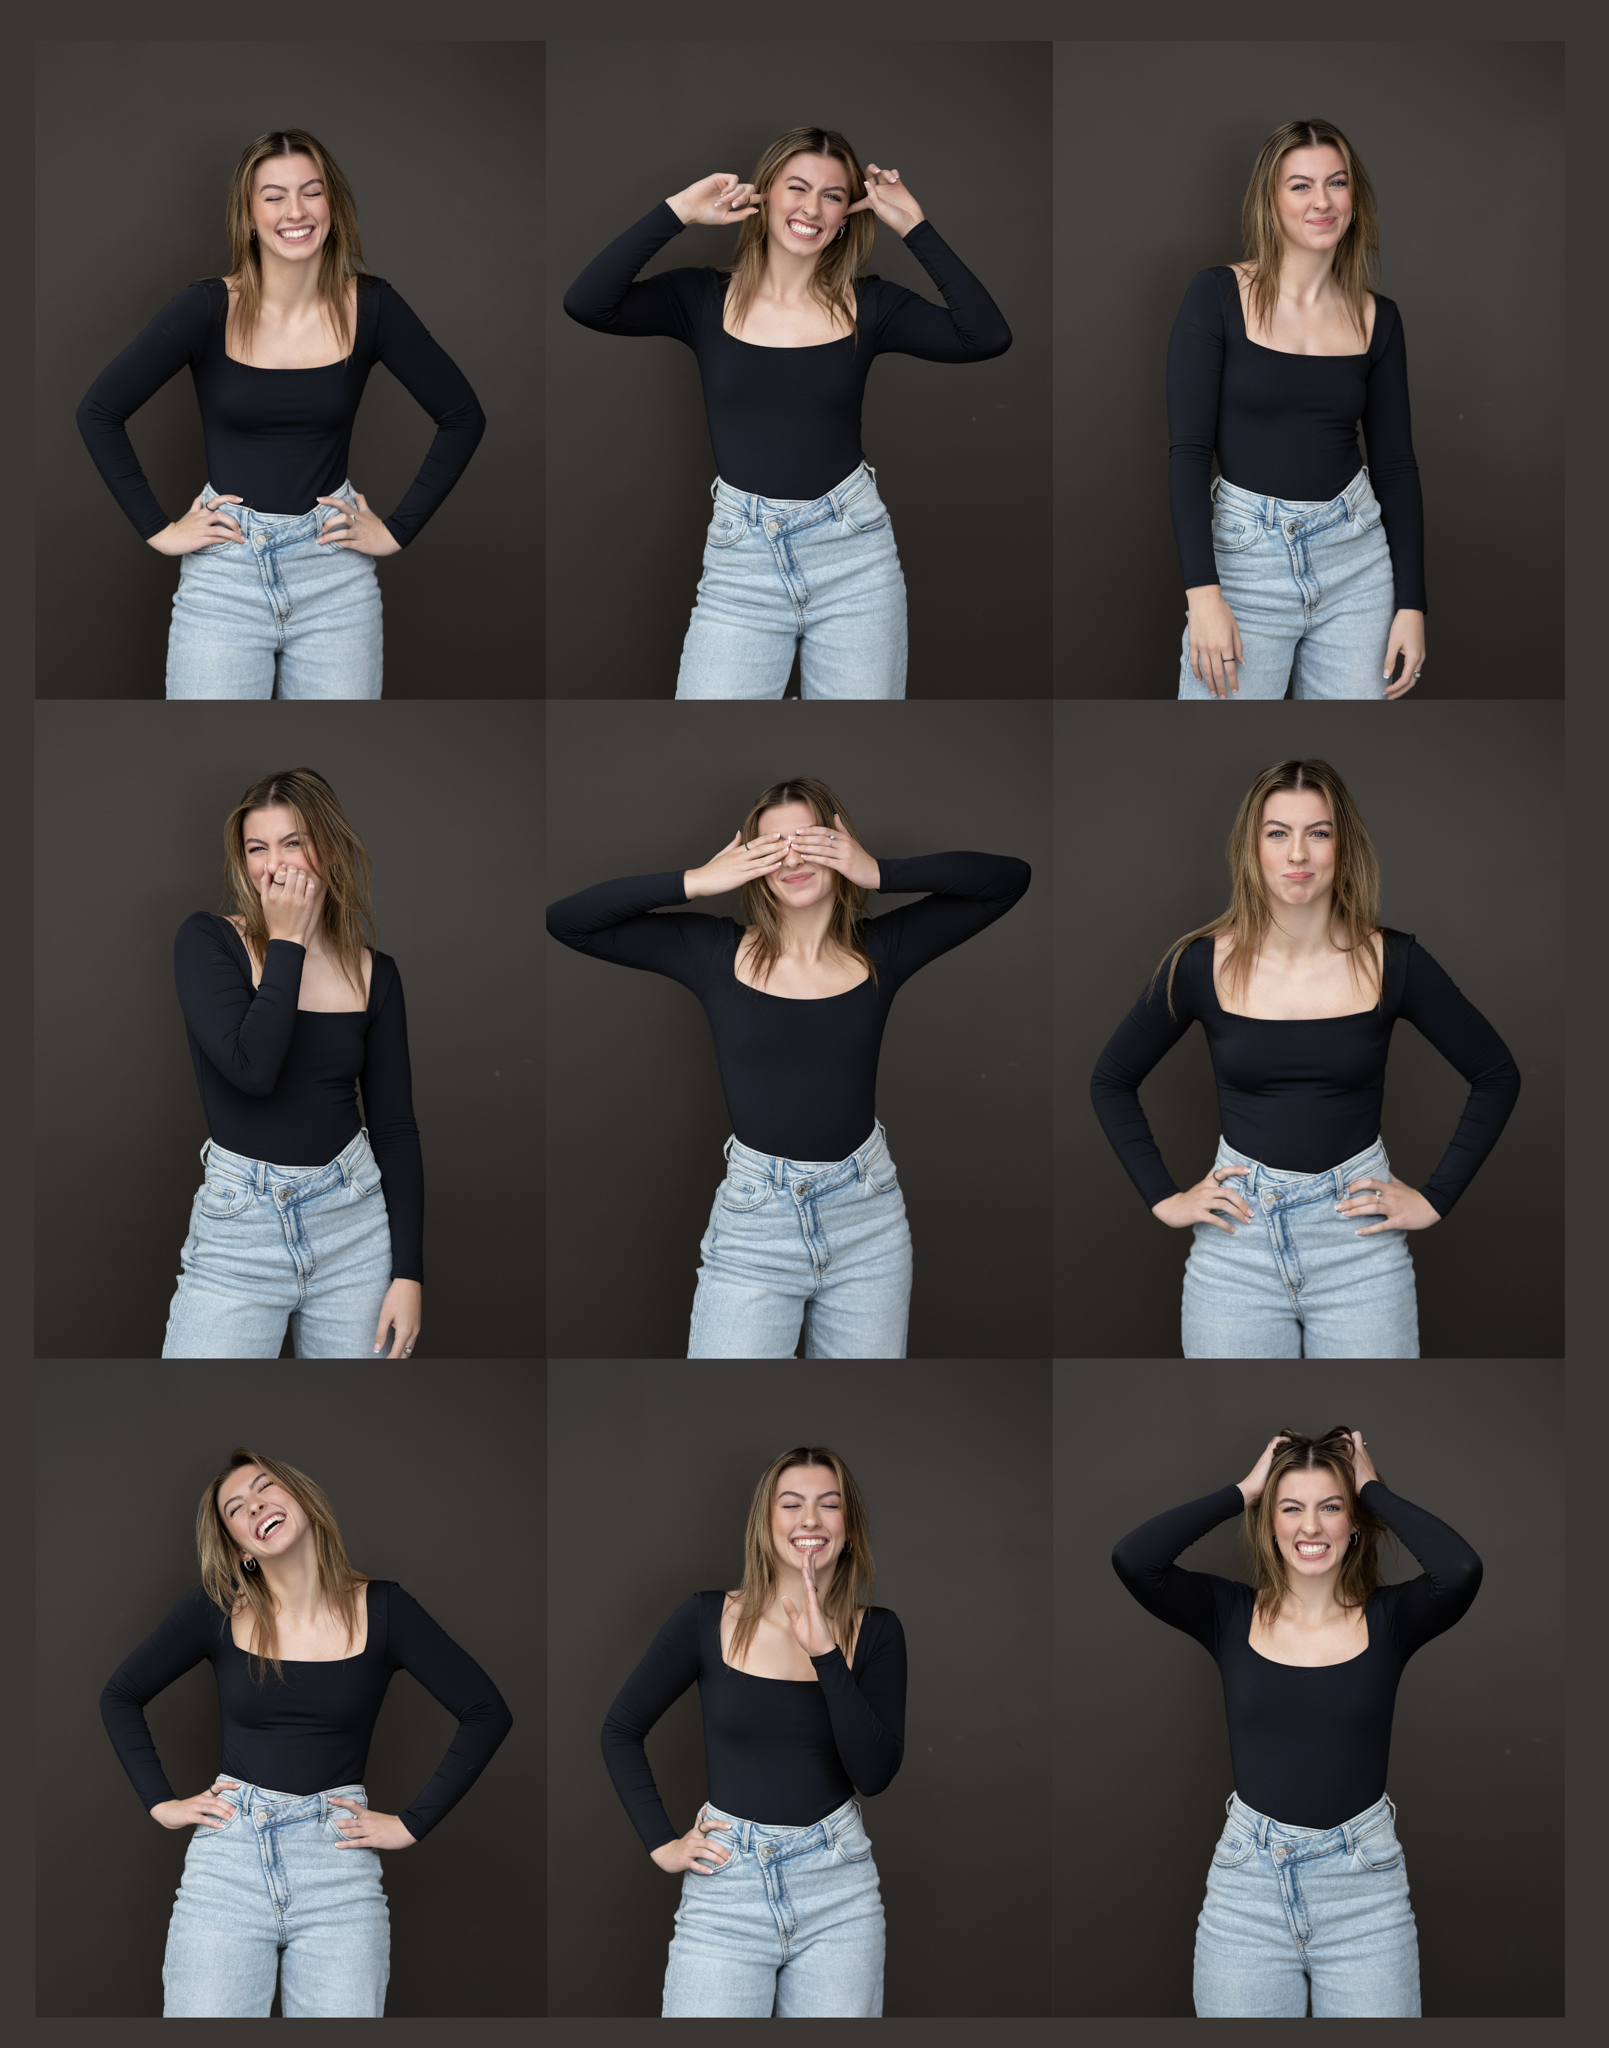 9 images of Annie doing various facial expressions for her senior picture wall collage